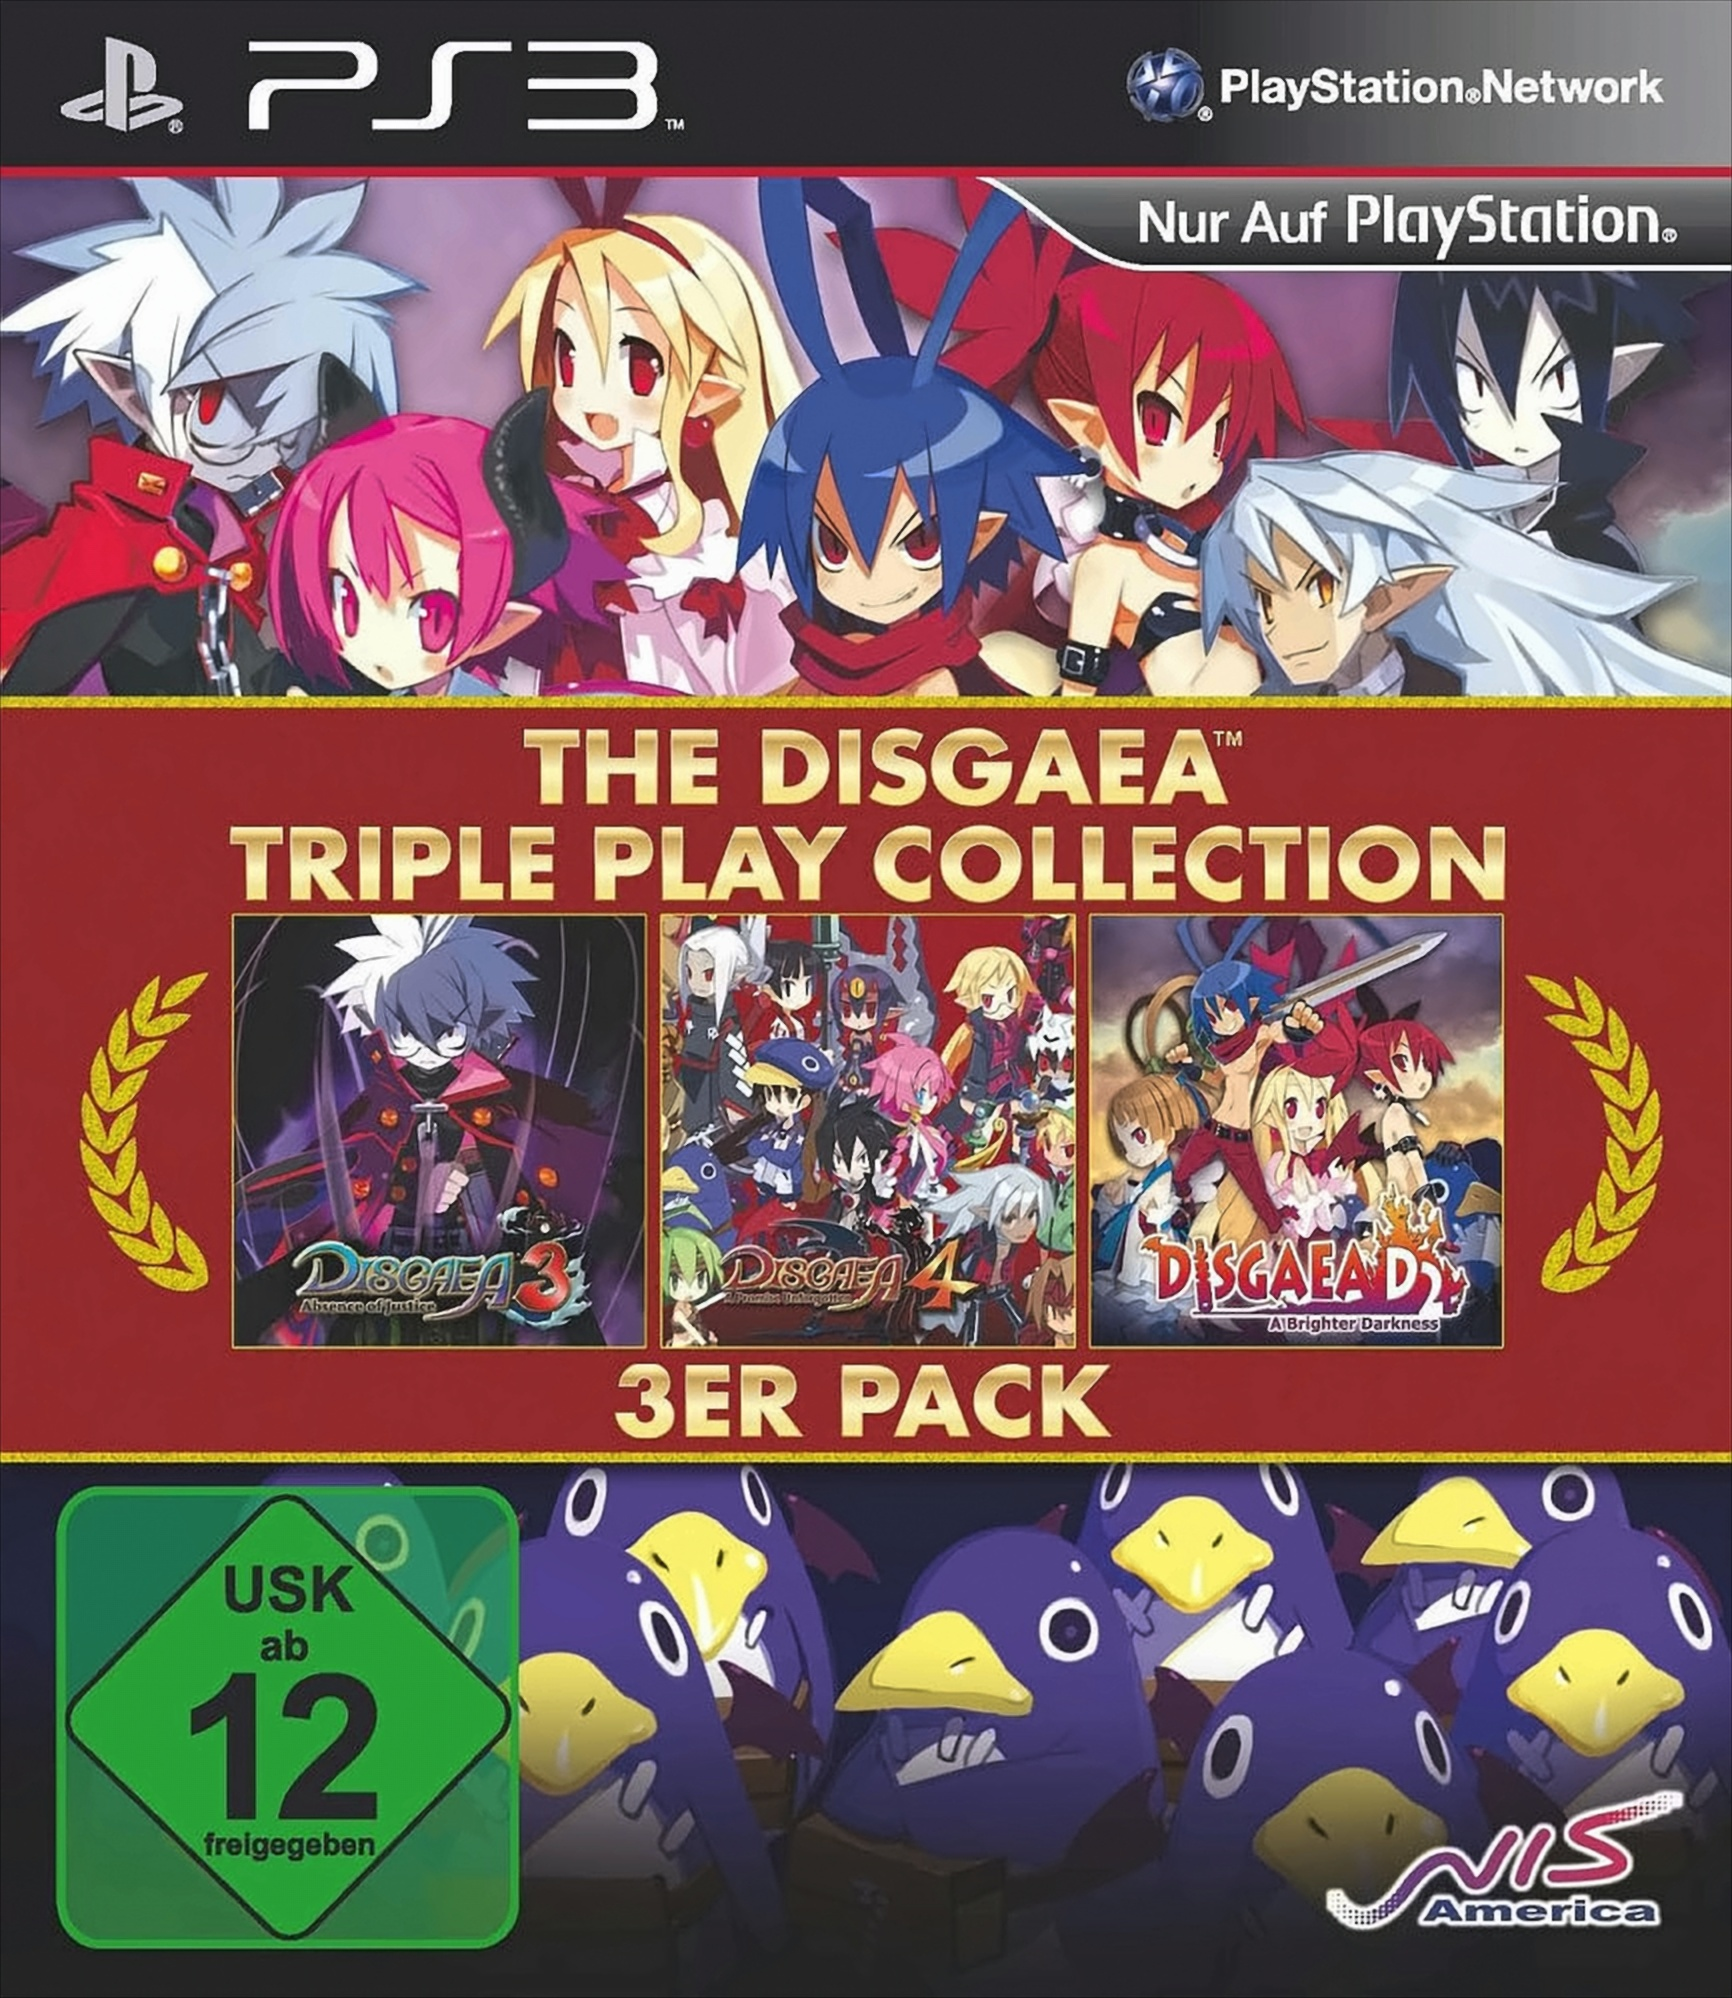 [PlayStation - Disgaea 3] The Play Triple Collection